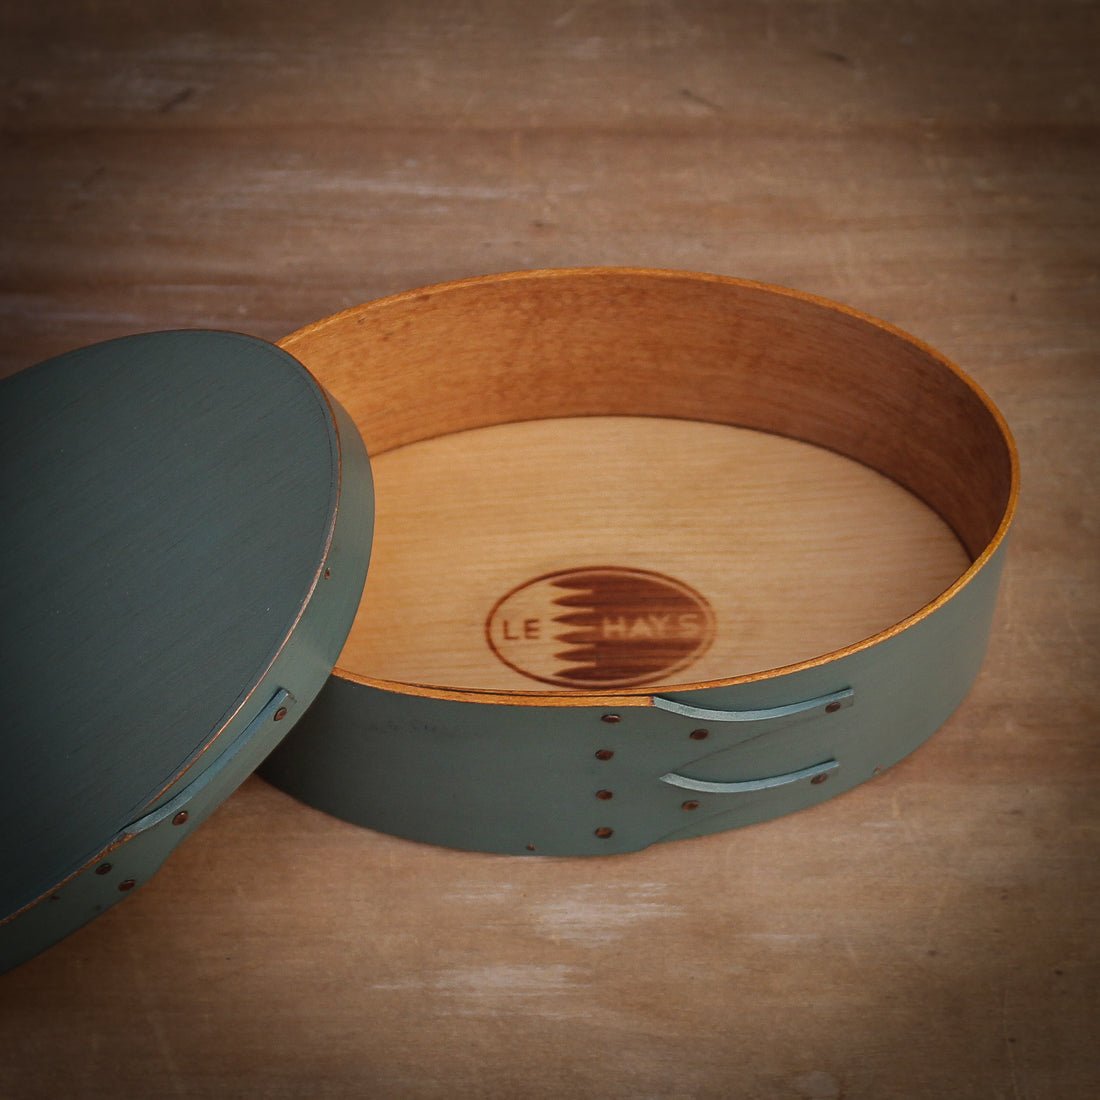 Shaker Oval Box, Size #2, LeHays Shaker Boxes, Handcrafted in Maine.  Interior View